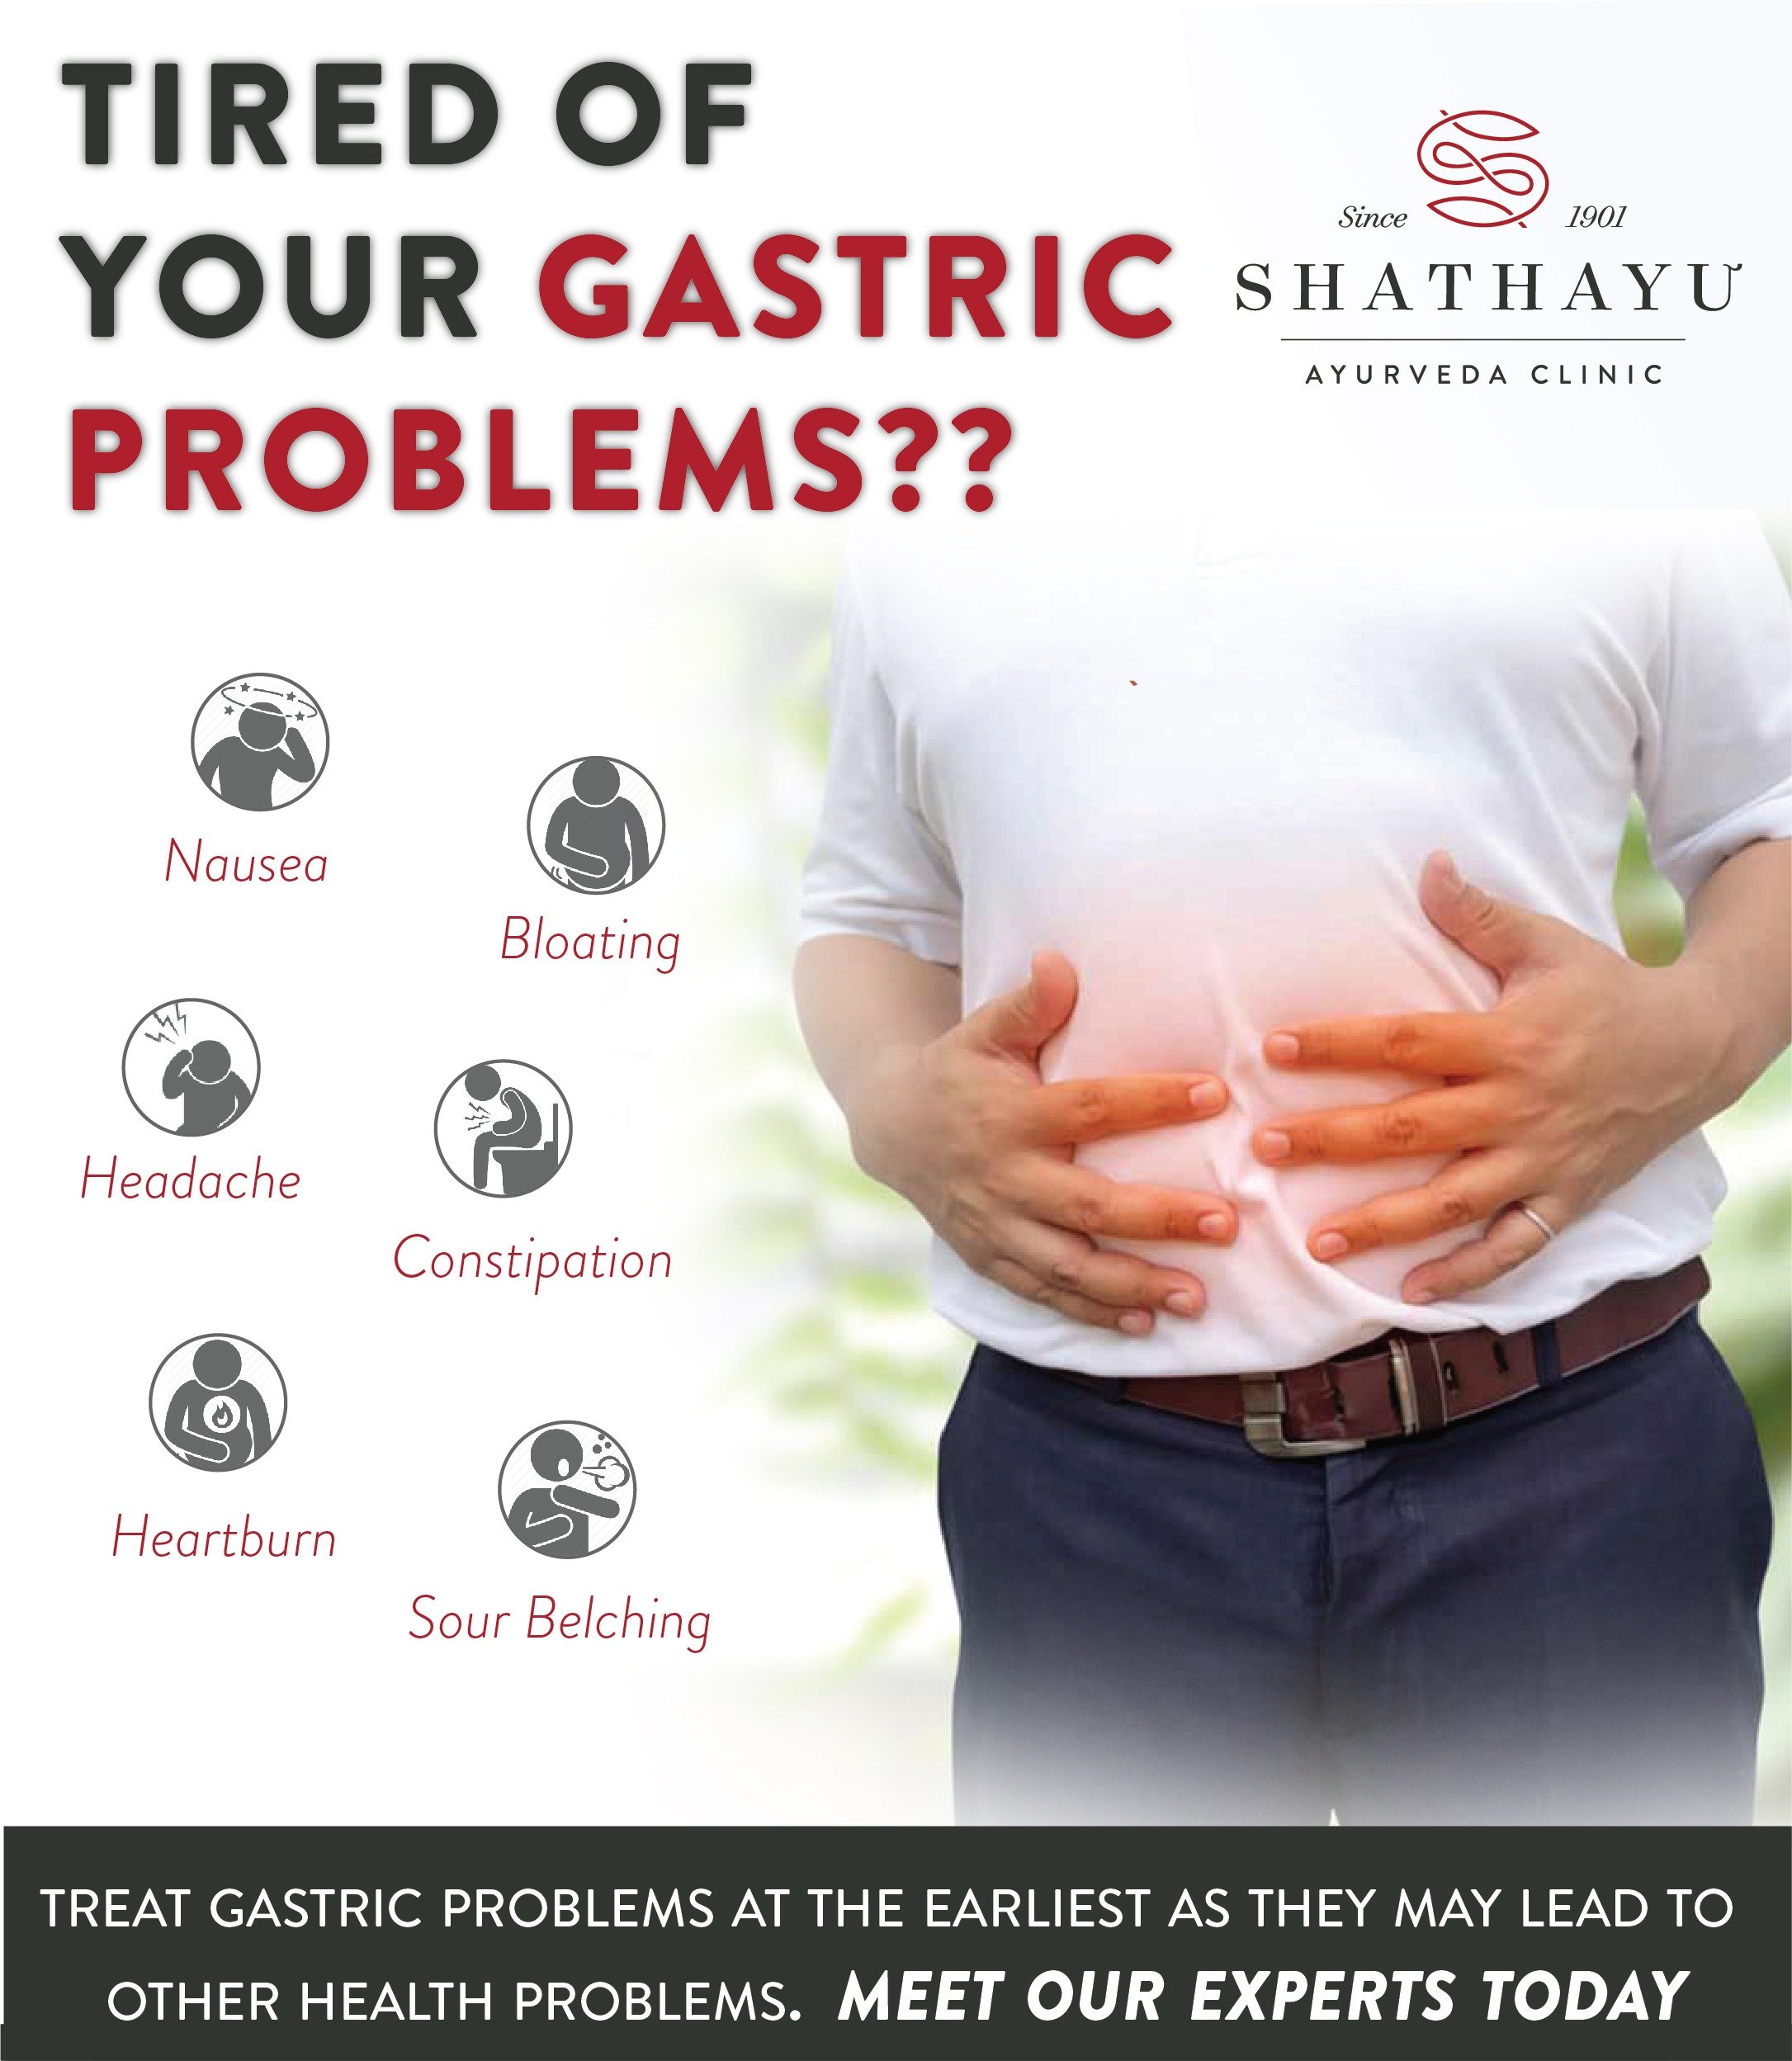 TIRED OF GASTRIC PROBLEMS?